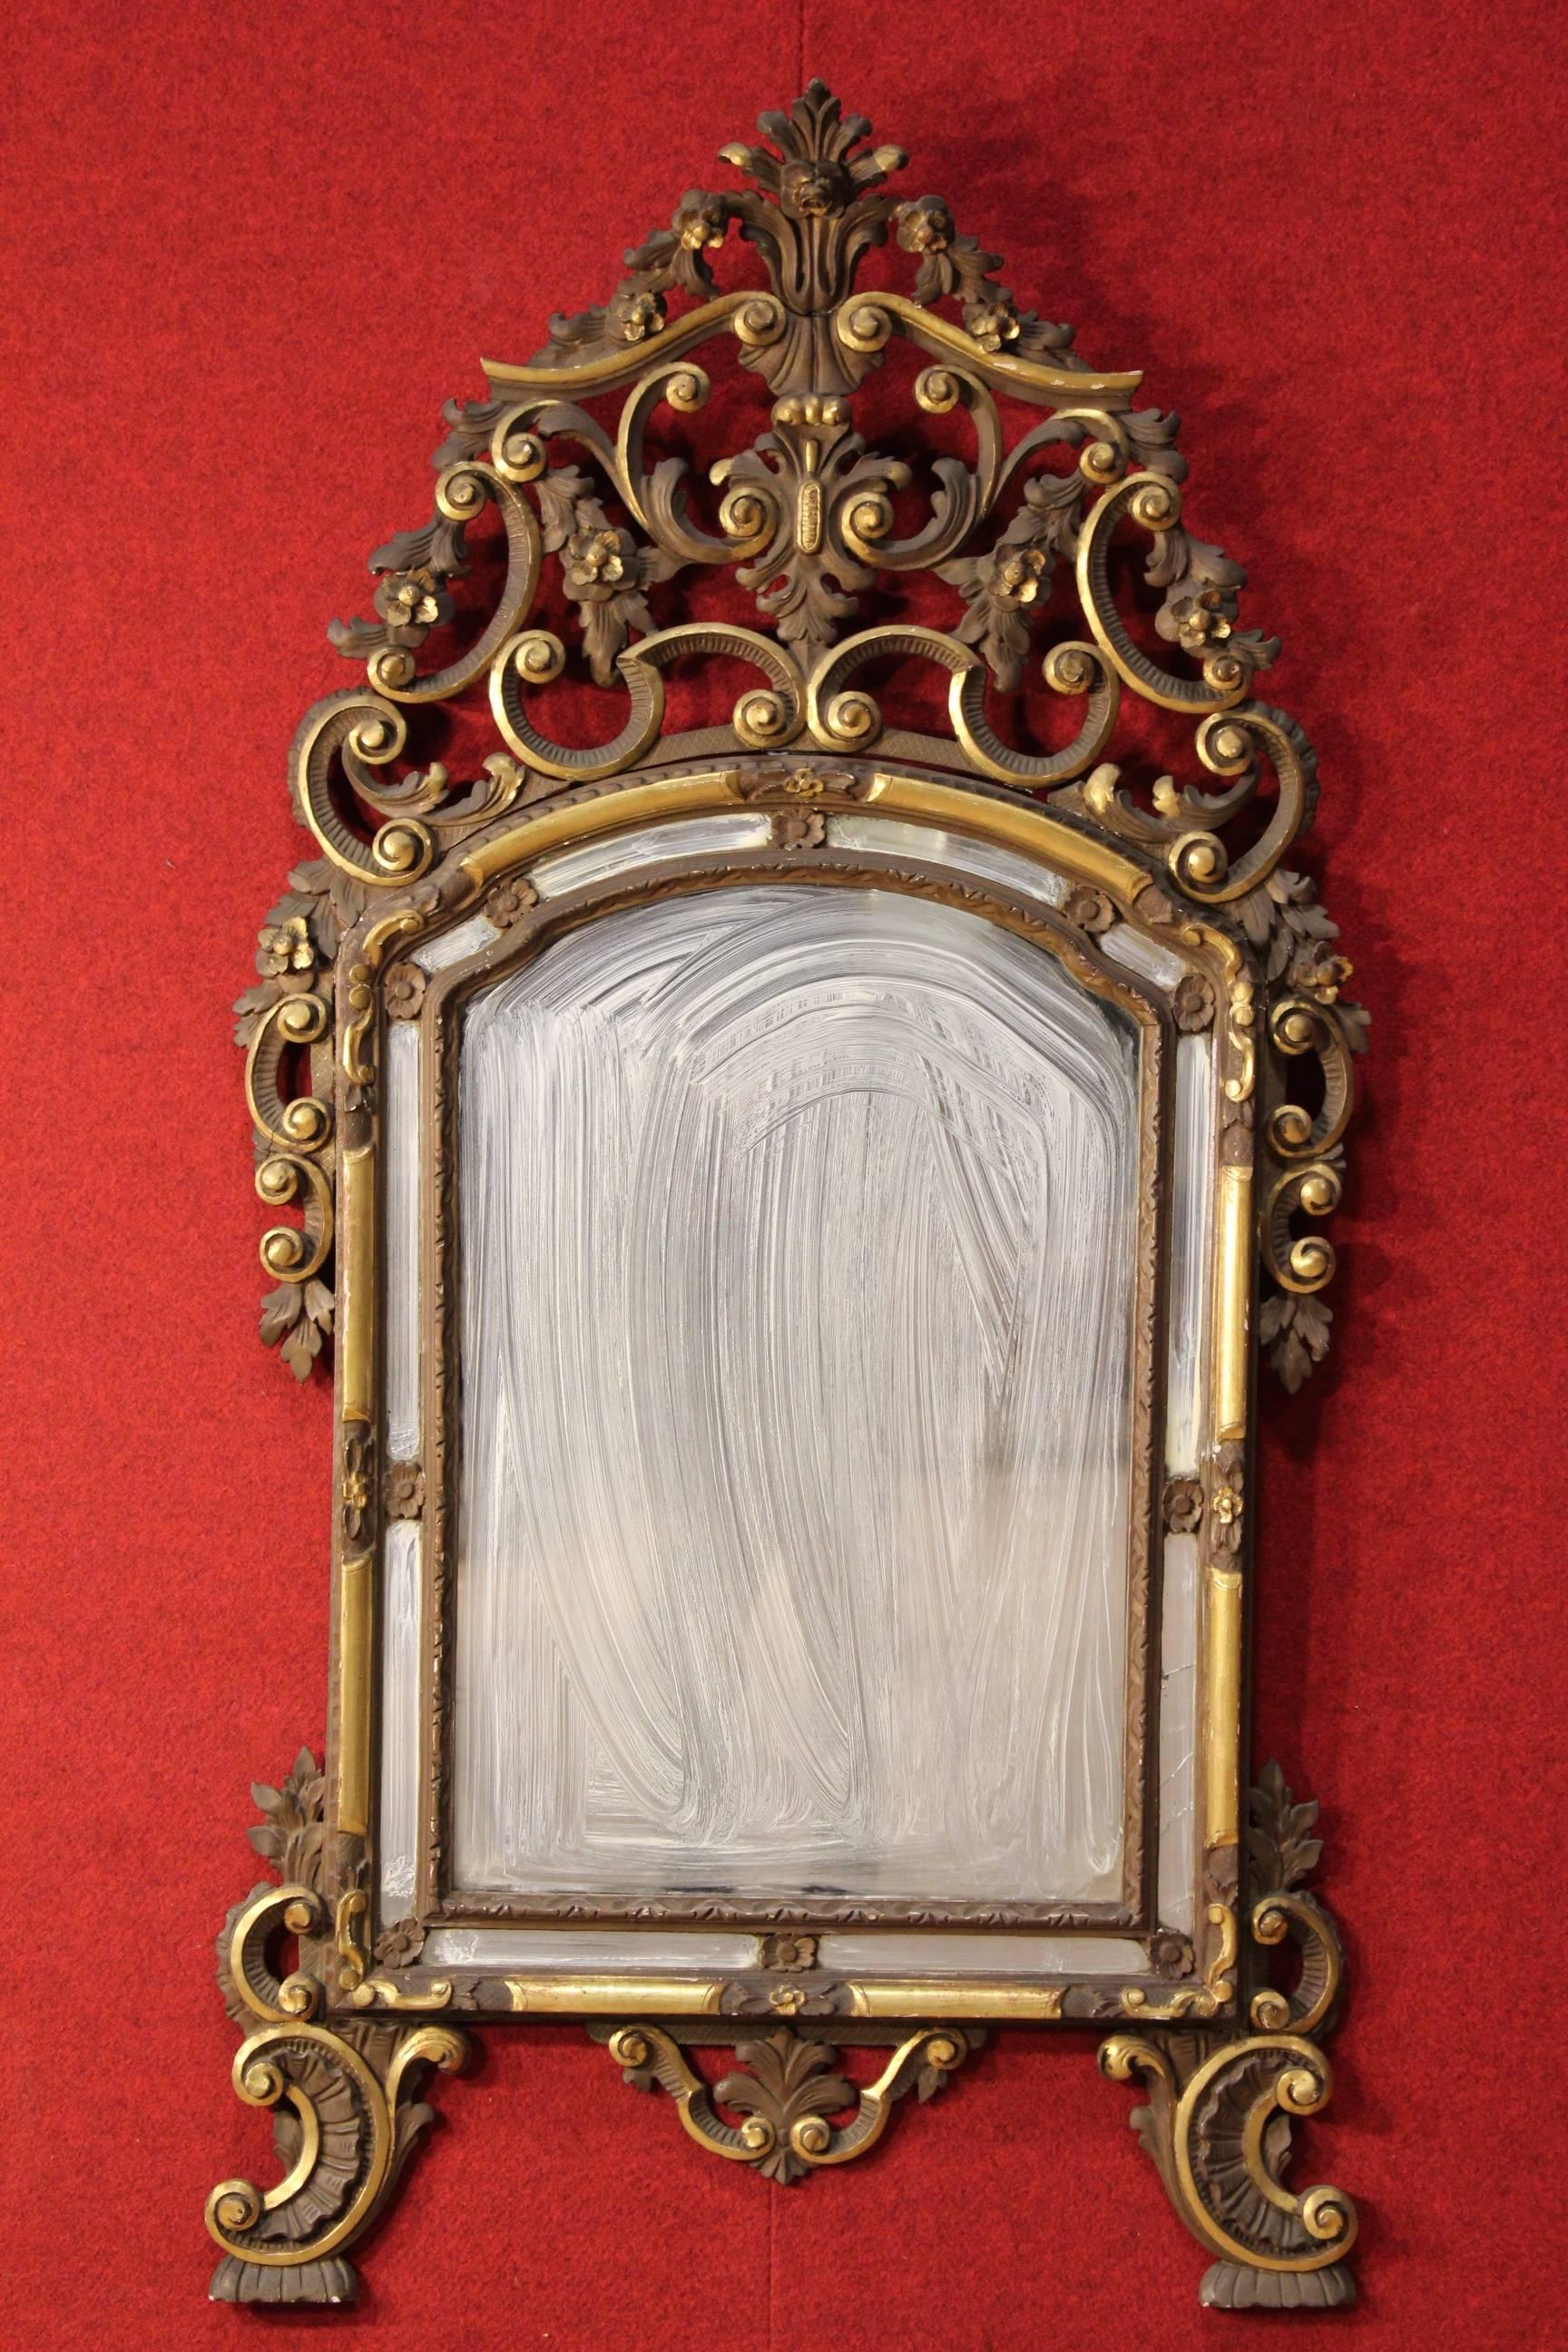 Italian lacquered and gilded mirror. 
Furniture from Turin in Louis XV style richly carved, gilded and painted. Mirror of the 20th century. Furniture decorated with frame with recessed mirrors, one in the lower right corner is broken. It has small